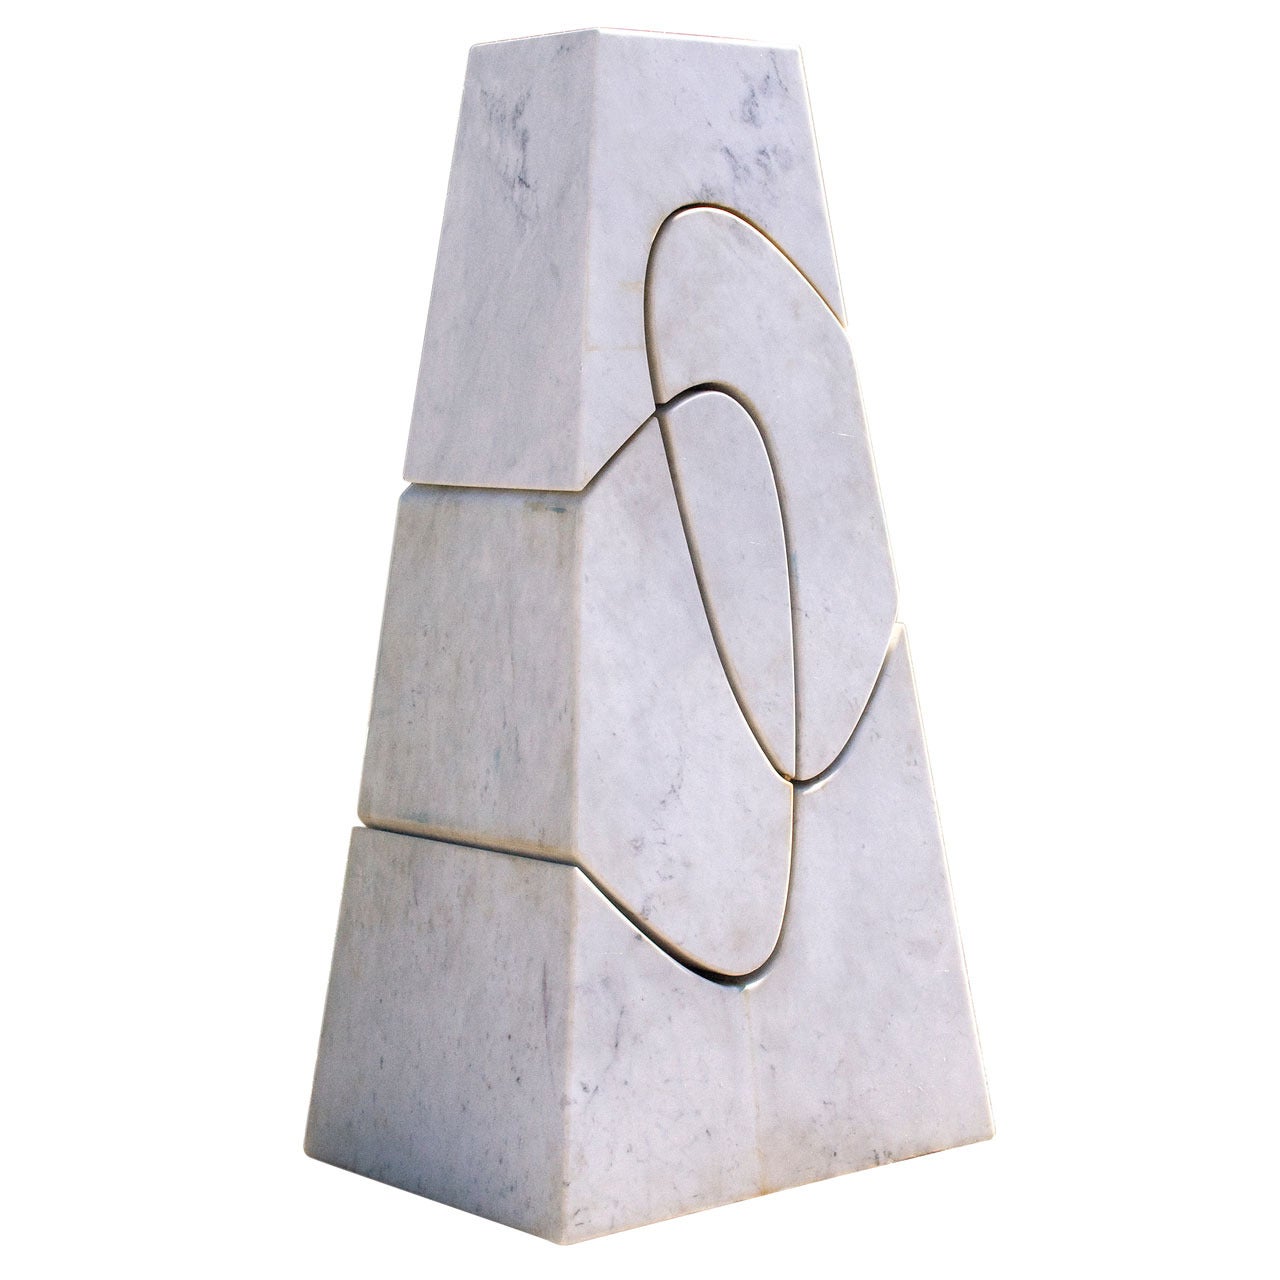 Exceptional Sculpture "Monumental Cambiamiento" by Angelo Mangiarotti, 2006